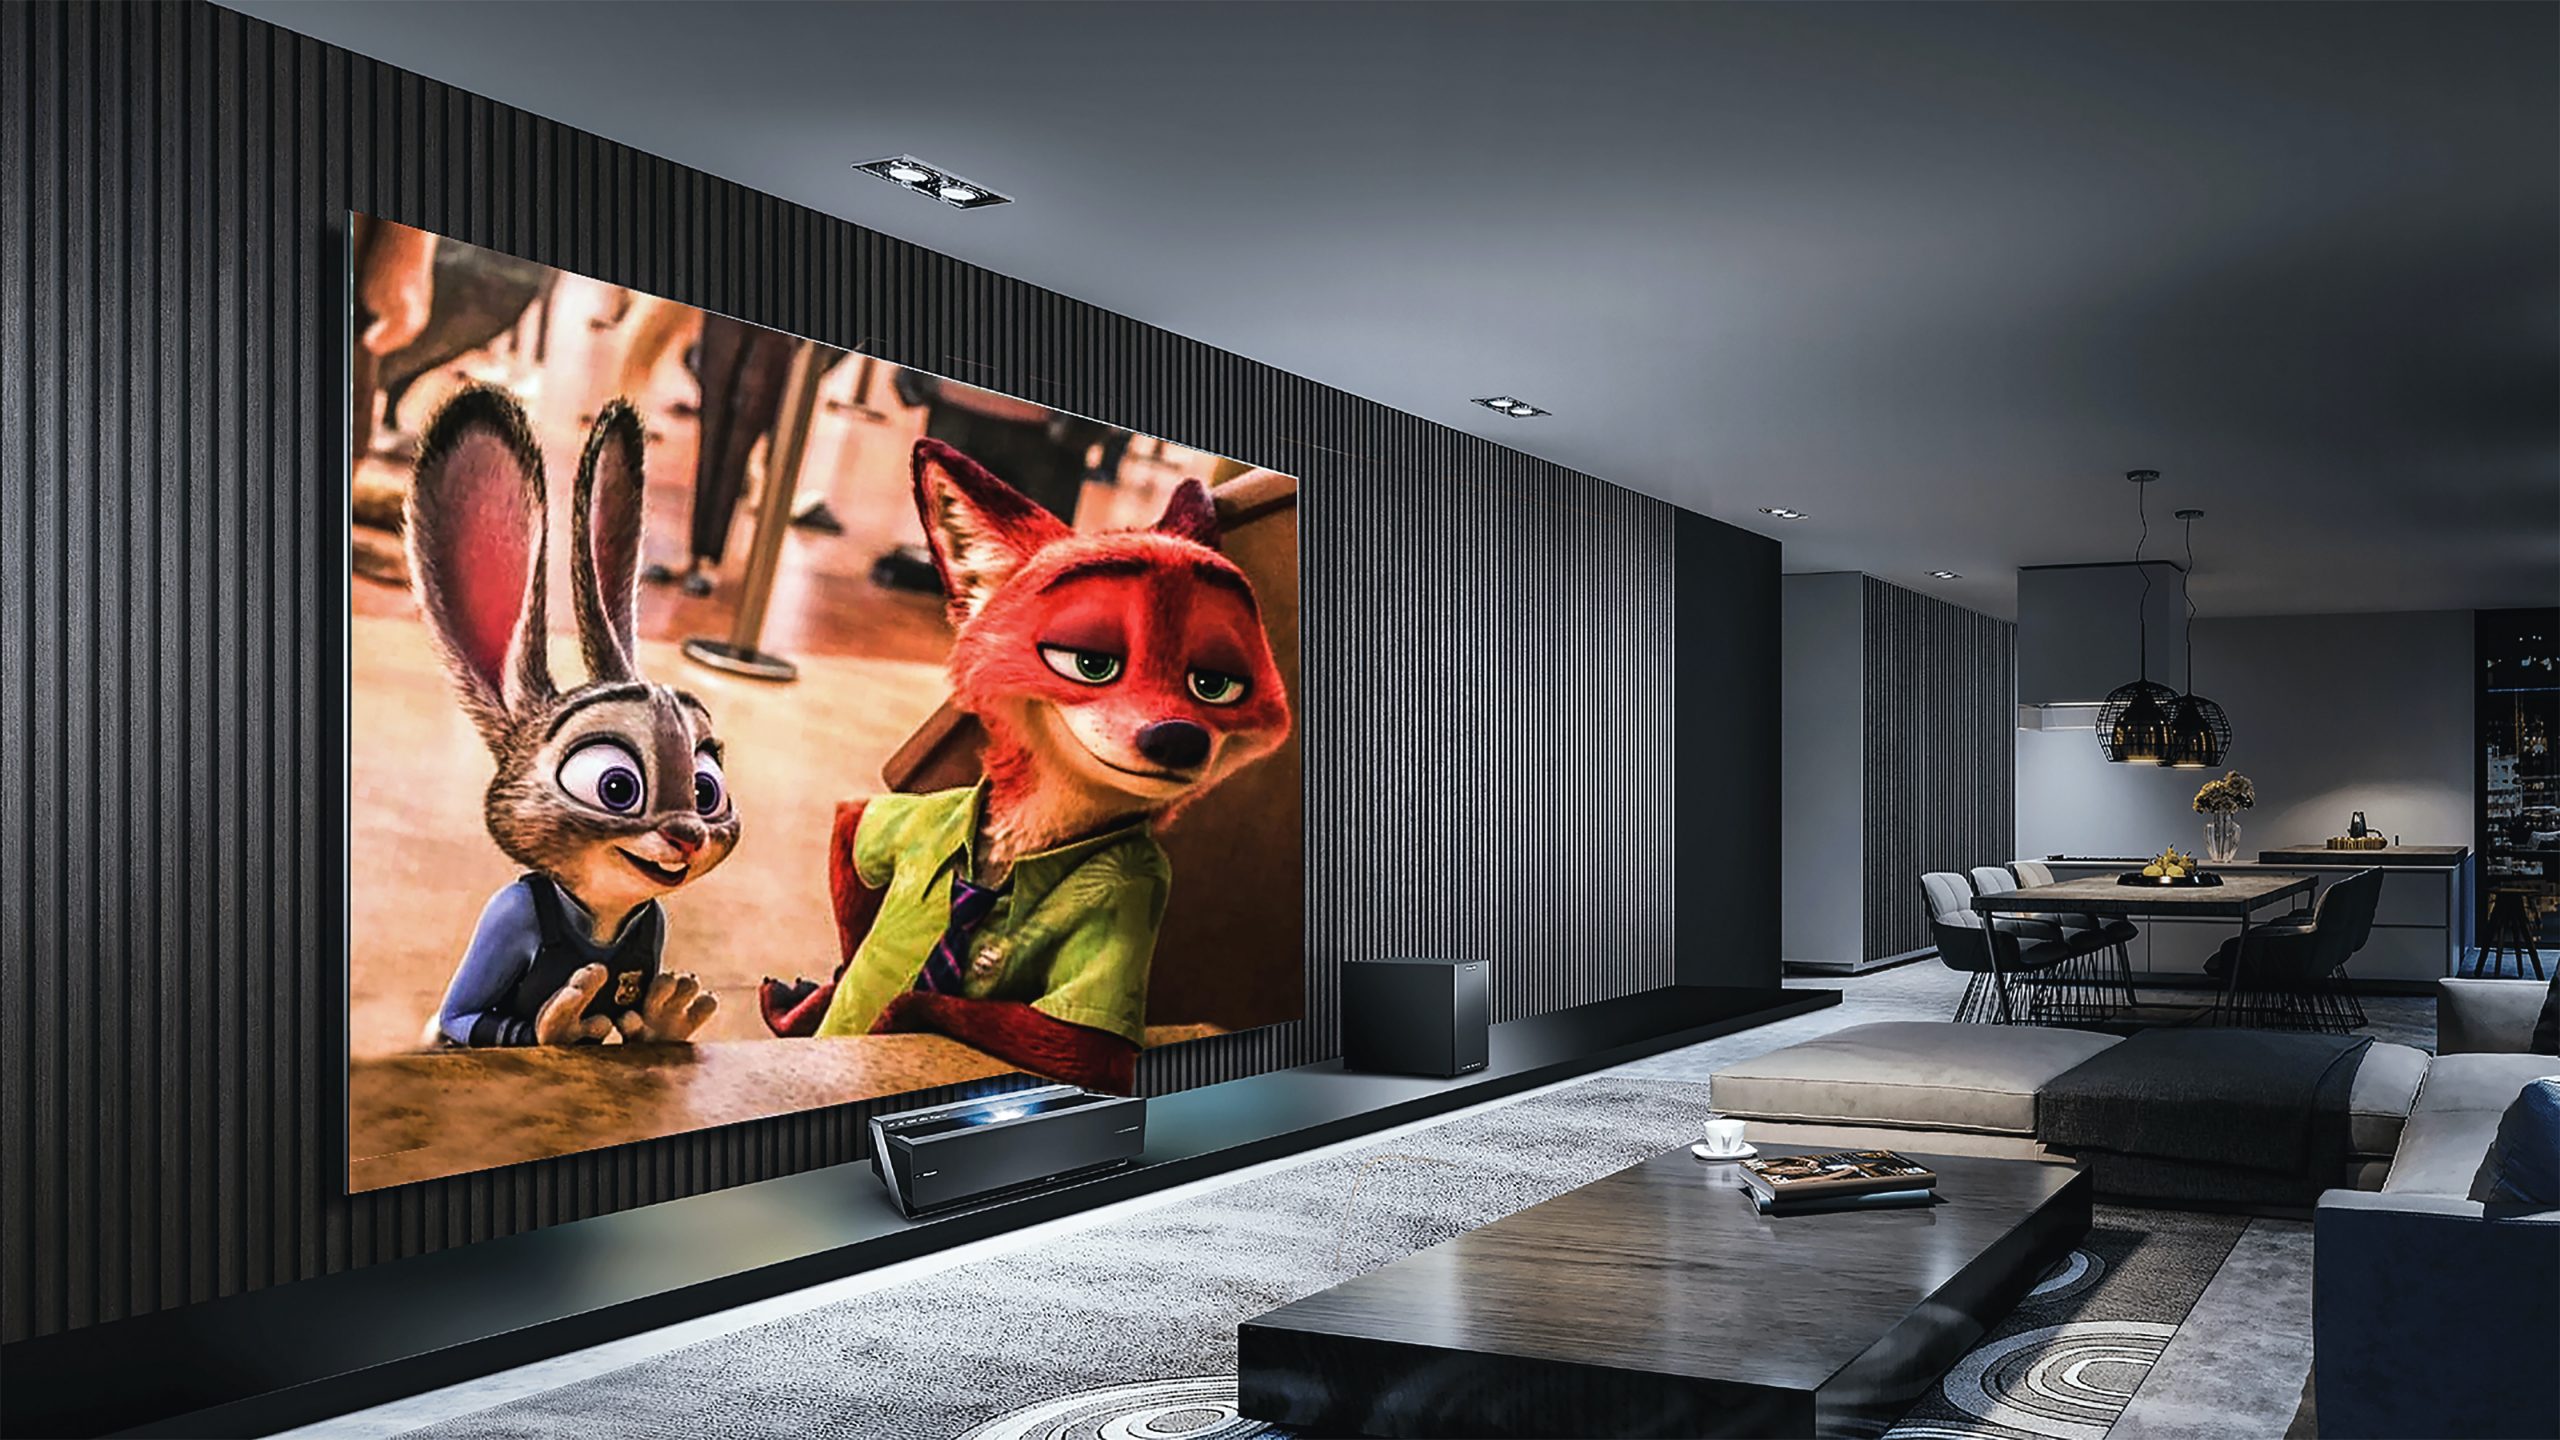 Slick home theater system